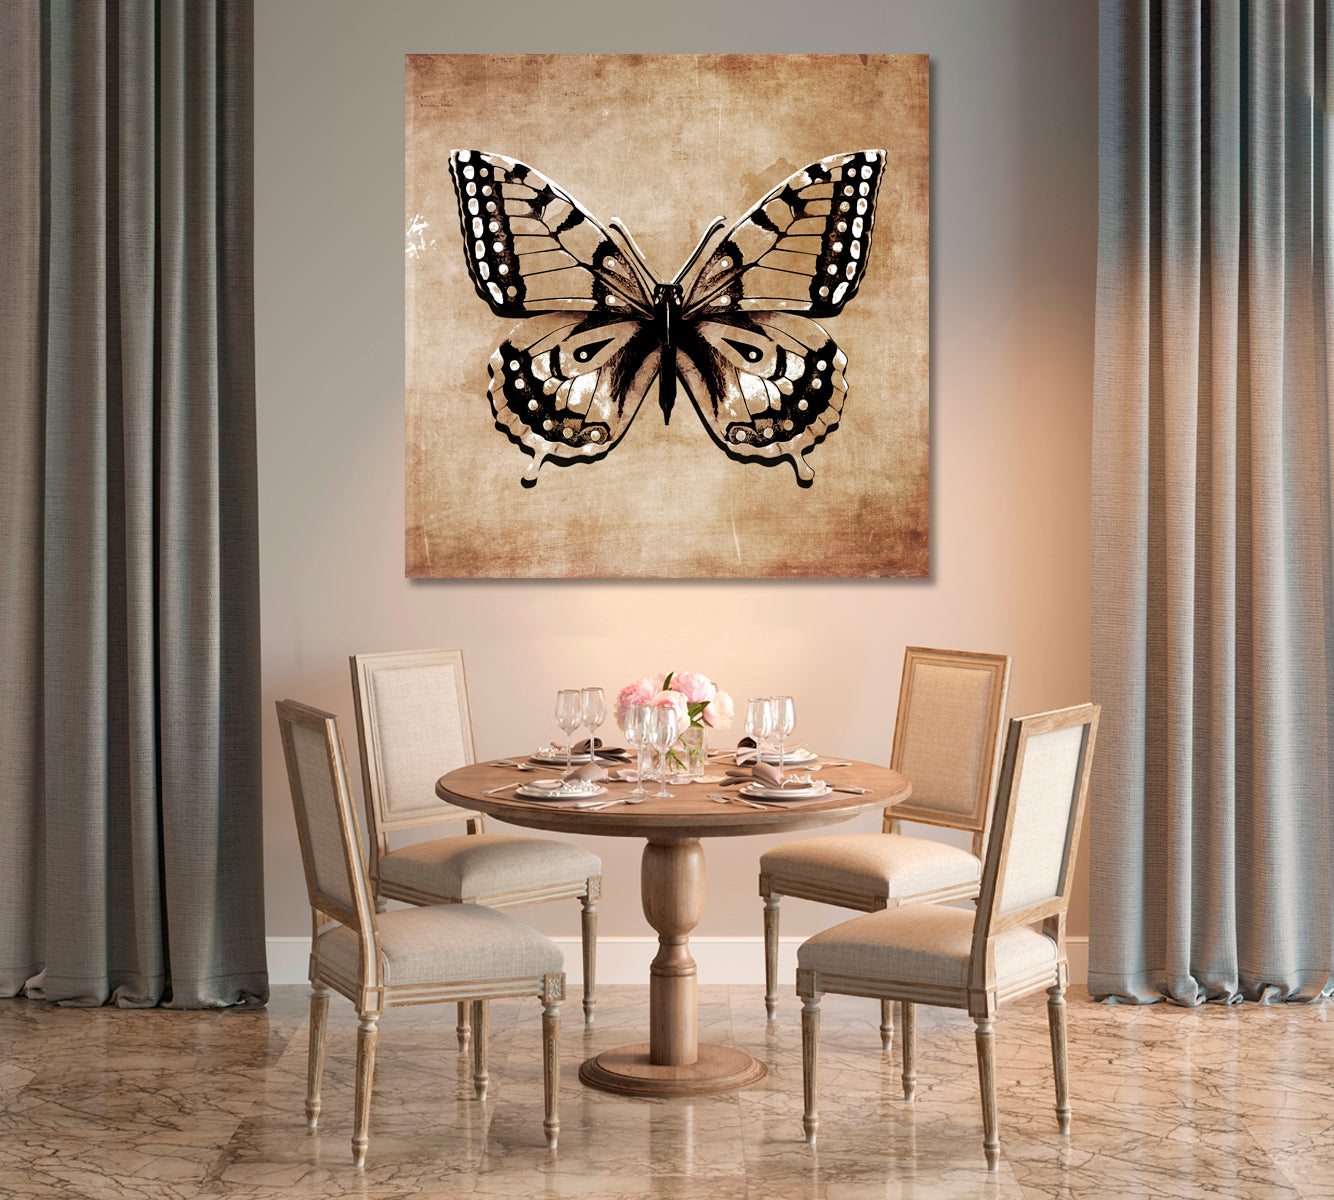 Vintage Abstract Butterfly Wall Art Canvas-Canvas Print-CetArt-1 panel-12x12 inches-CetArt